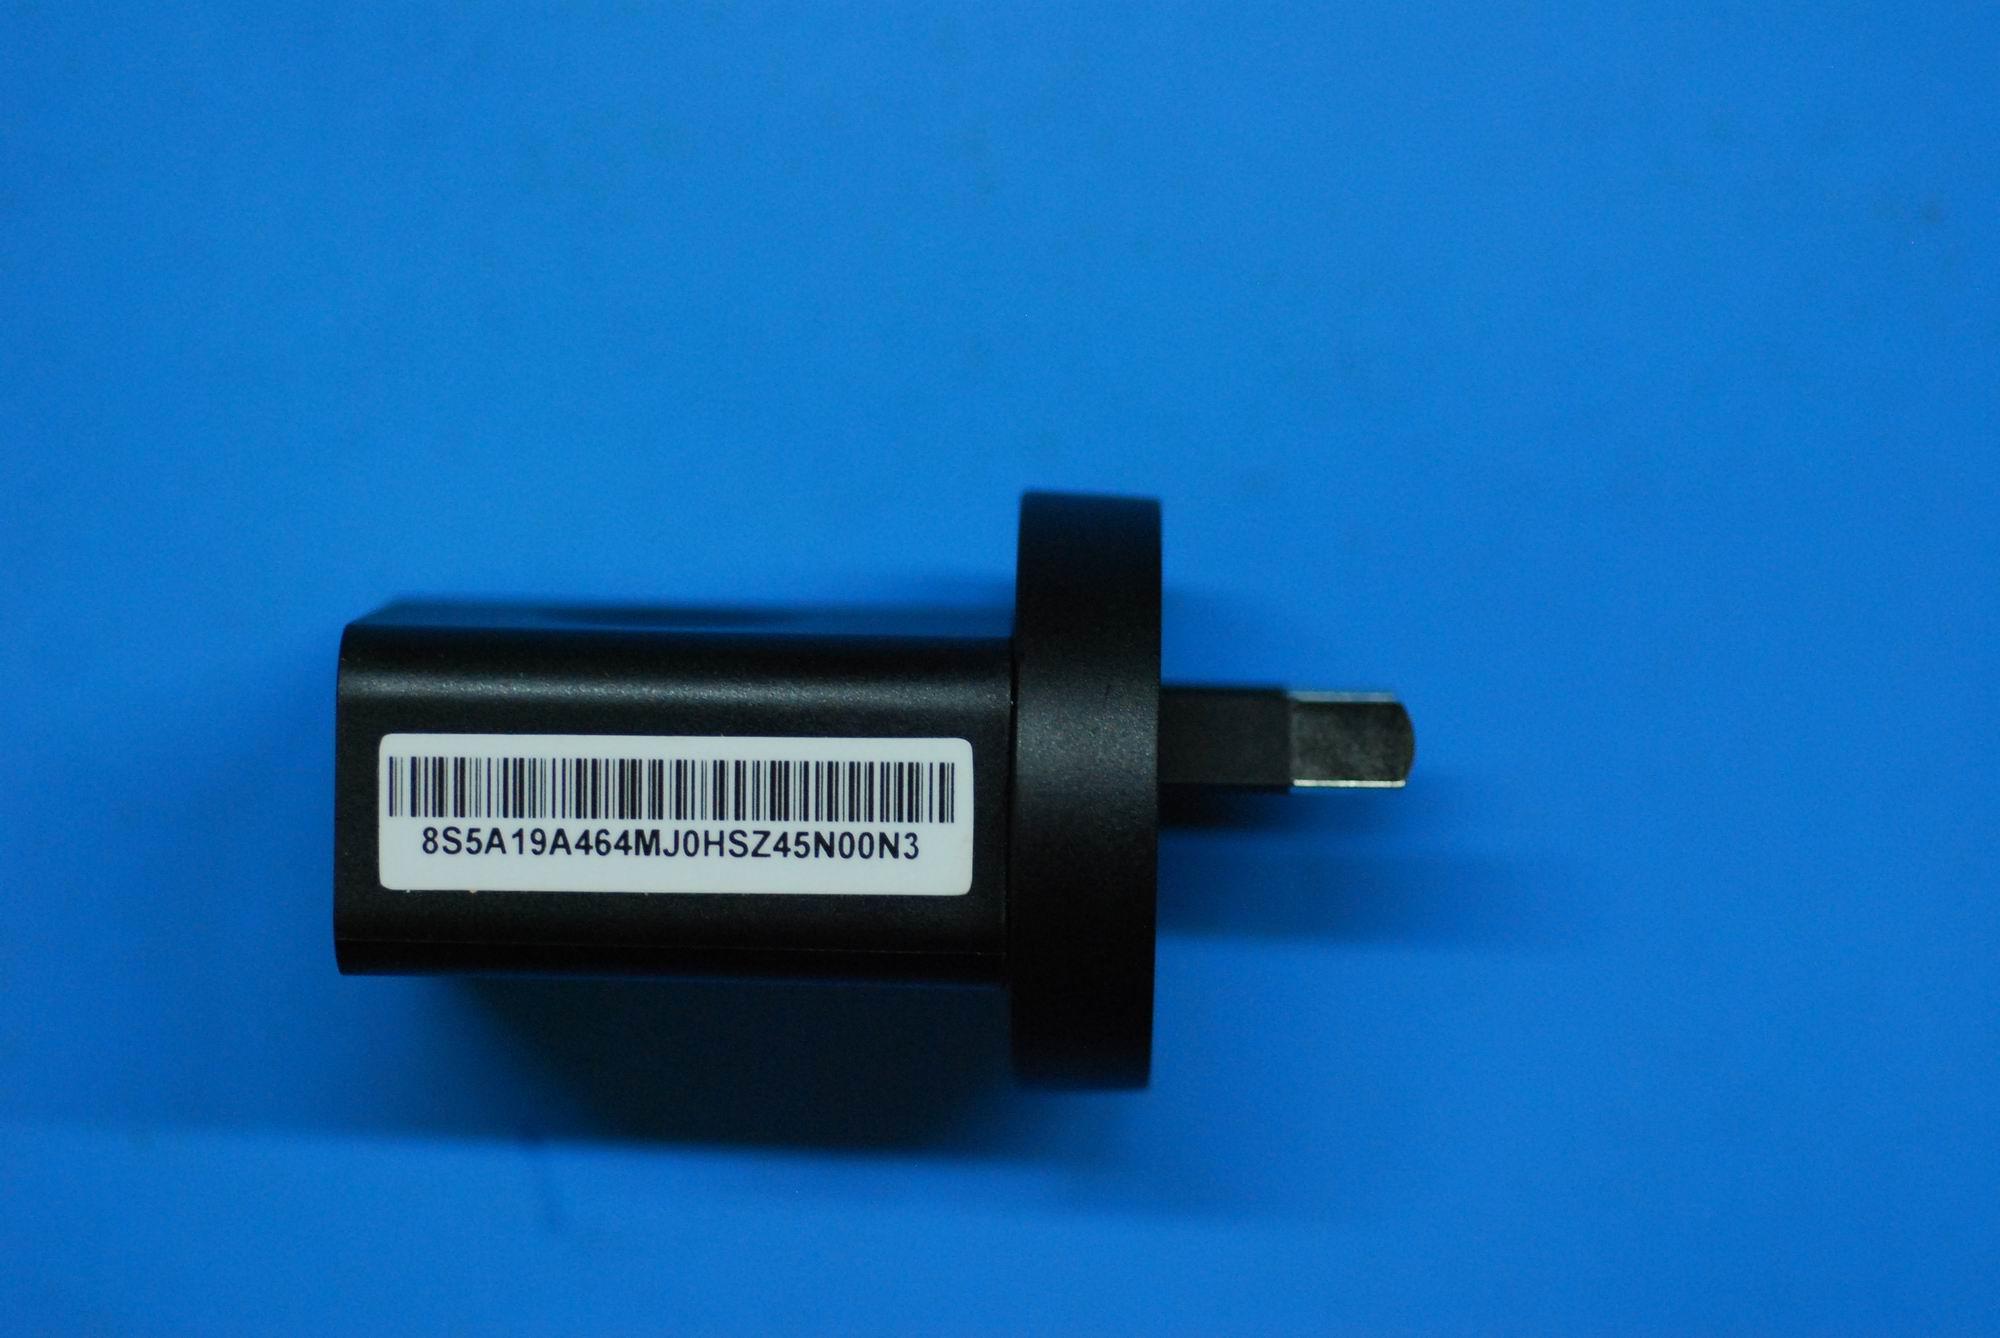 Lenovo A10-70 Tablet (A7600) Charger/Adapter - 5A19A464MJ